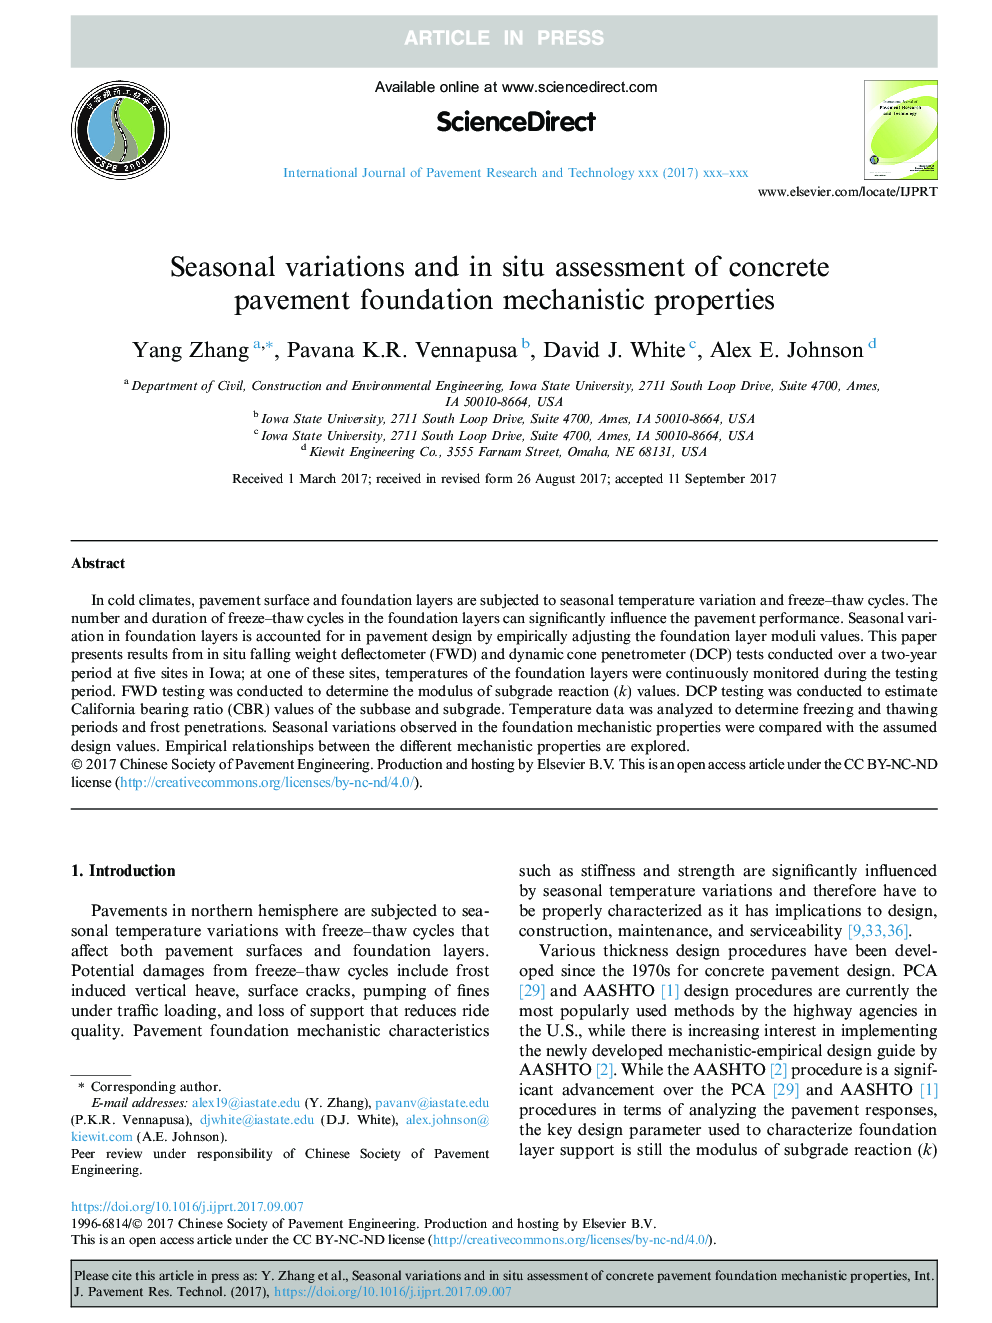 Seasonal variations and in situ assessment of concrete pavement foundation mechanistic properties